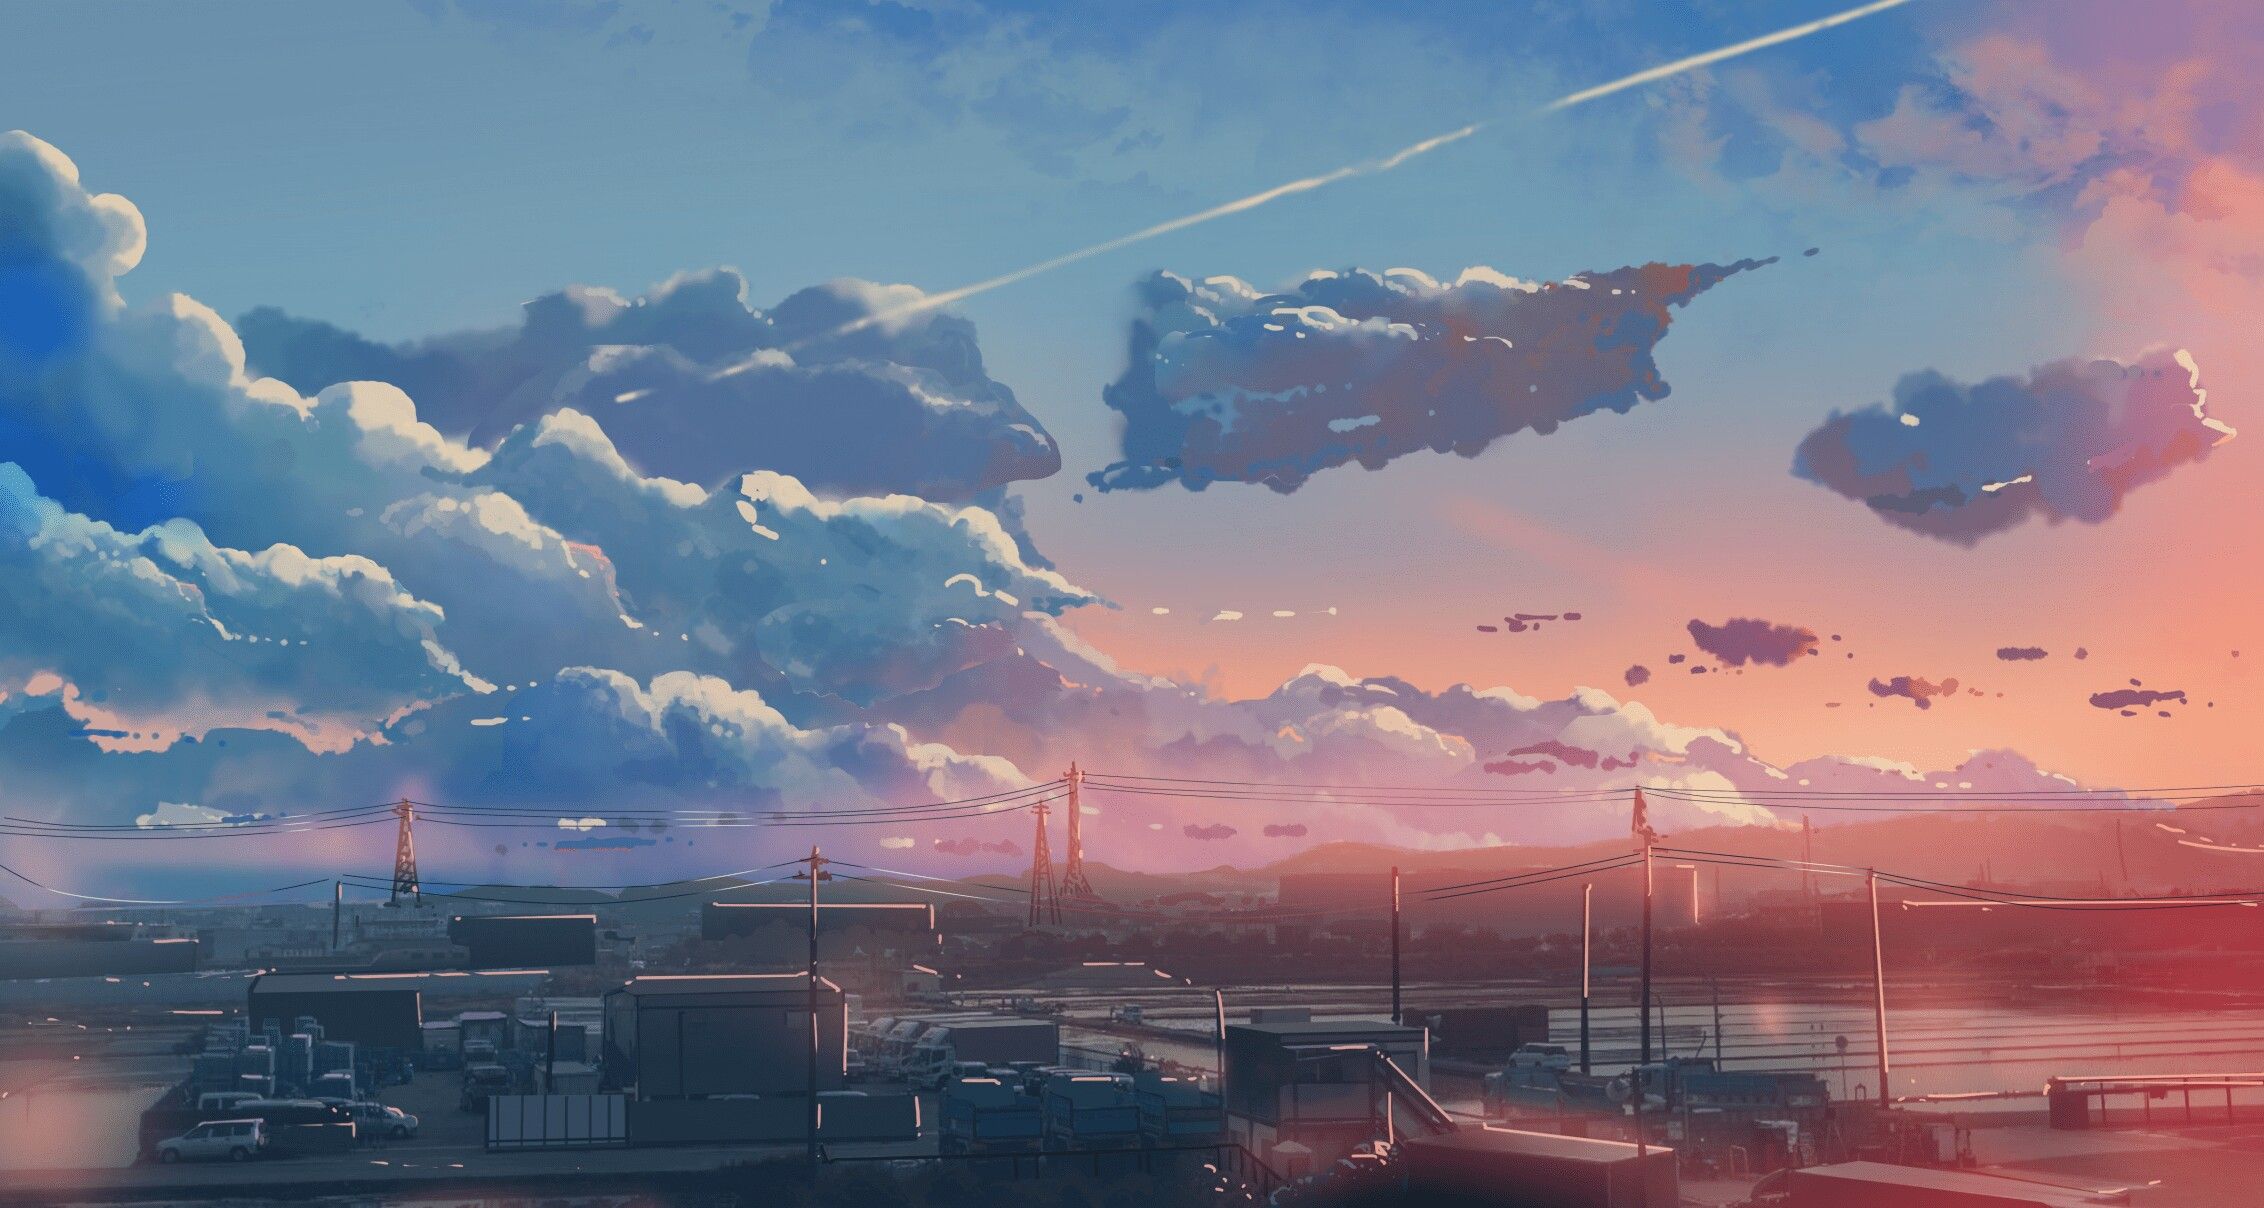 Anime scenery wallpaper 1920x1080 for android 50 images - Anime sunset